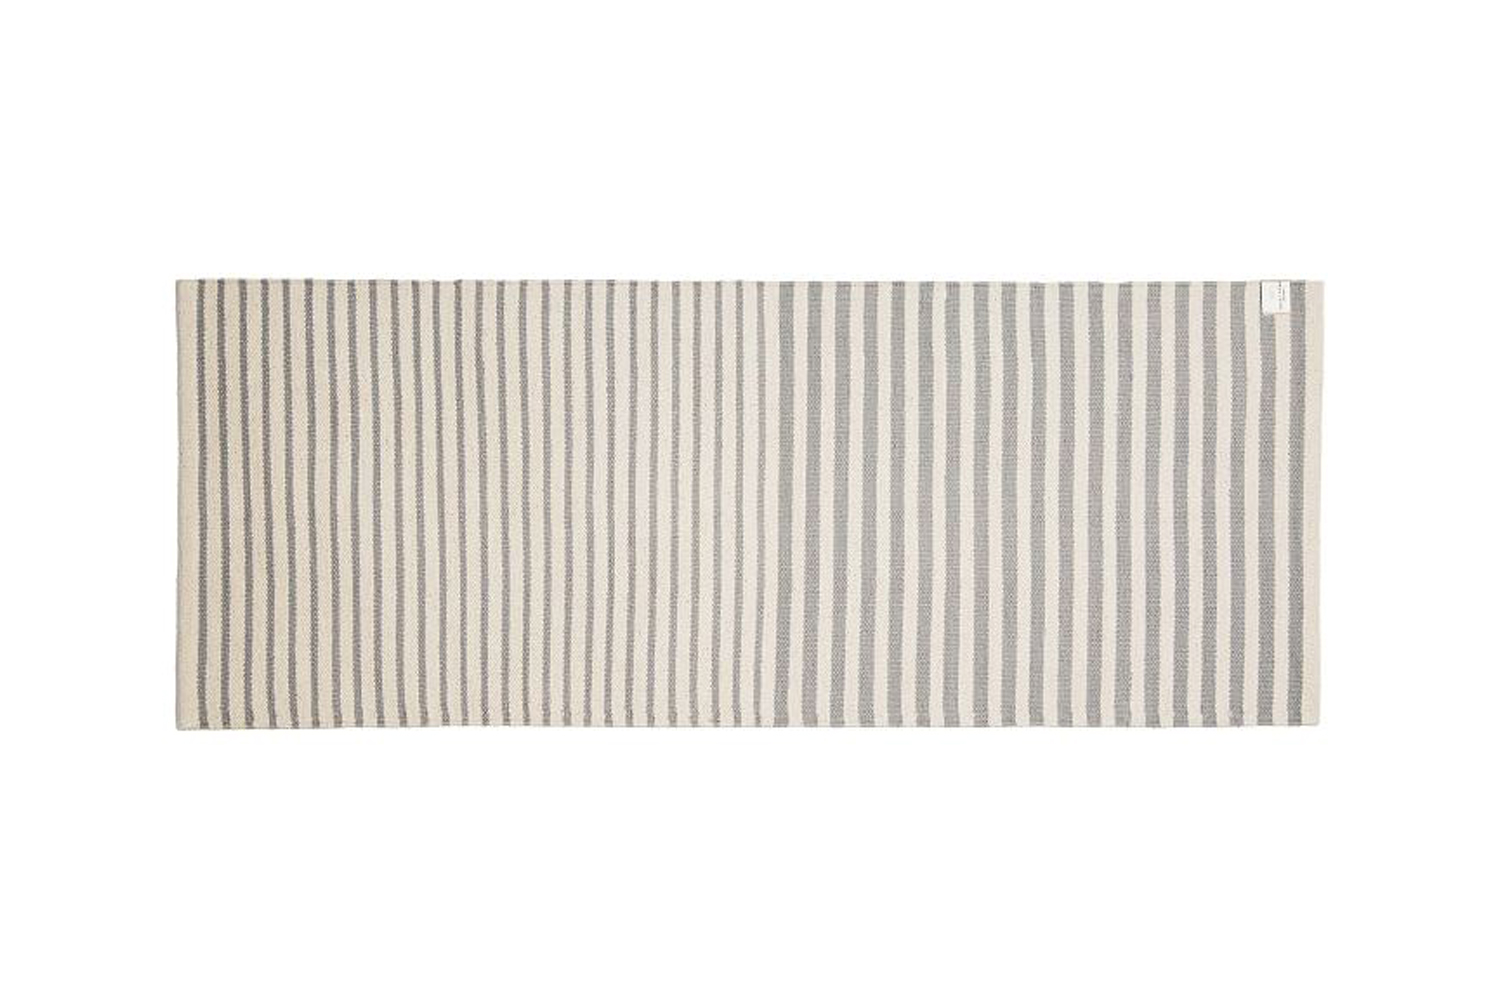 the quiet town ojai rectangle runner rug in storm is \$78 at west elm. 21